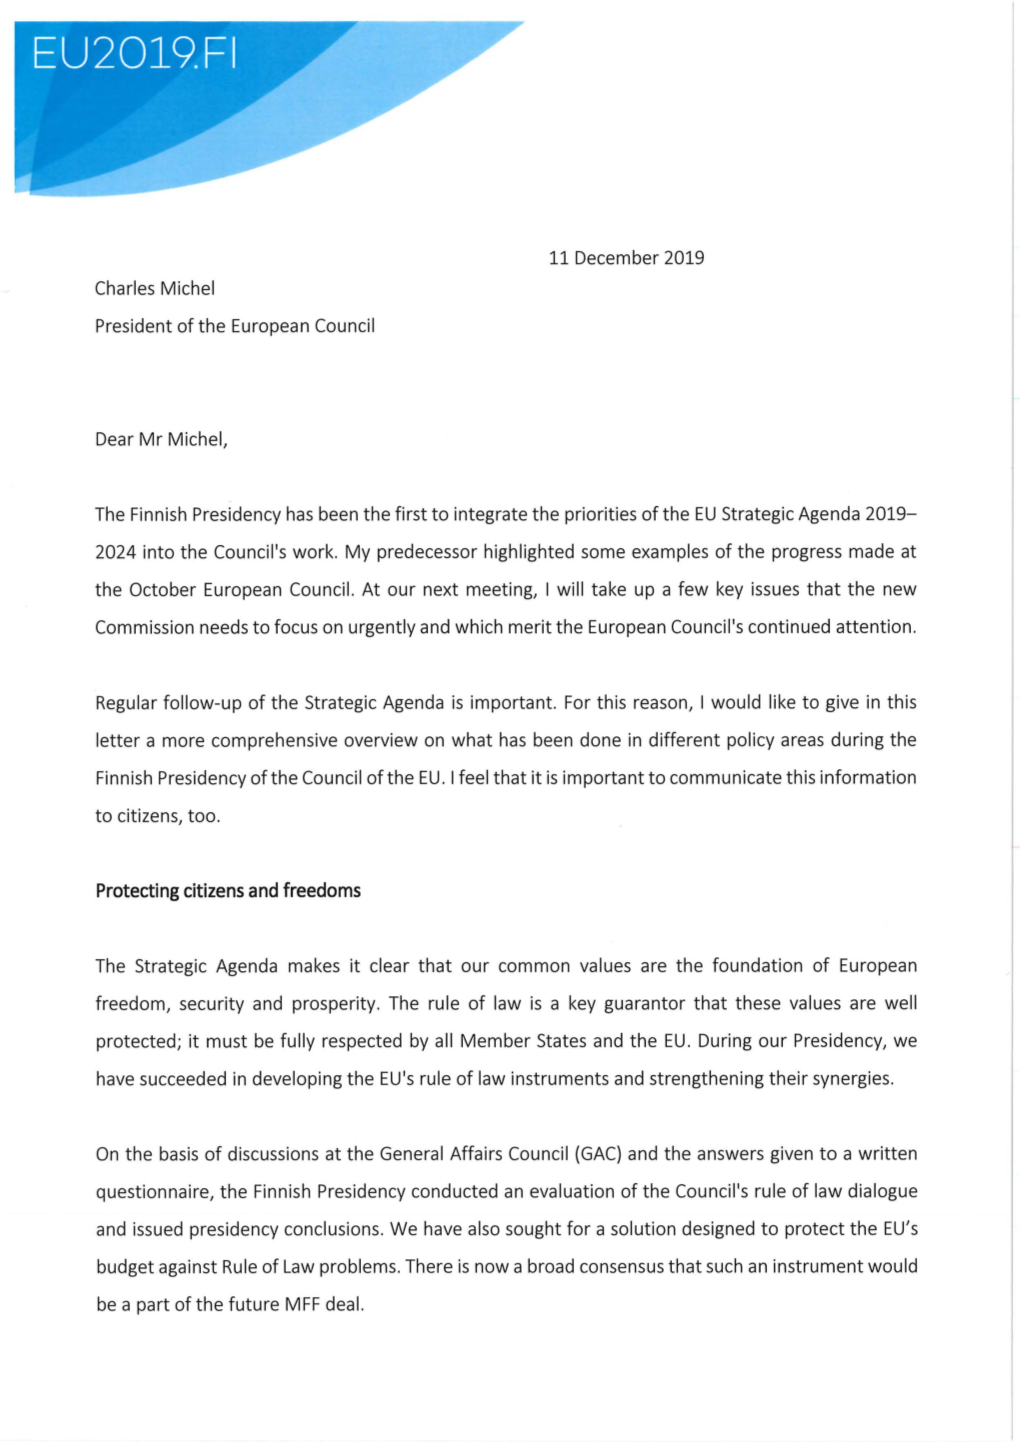 Prime Minister Marin's Letter to PEC Michel